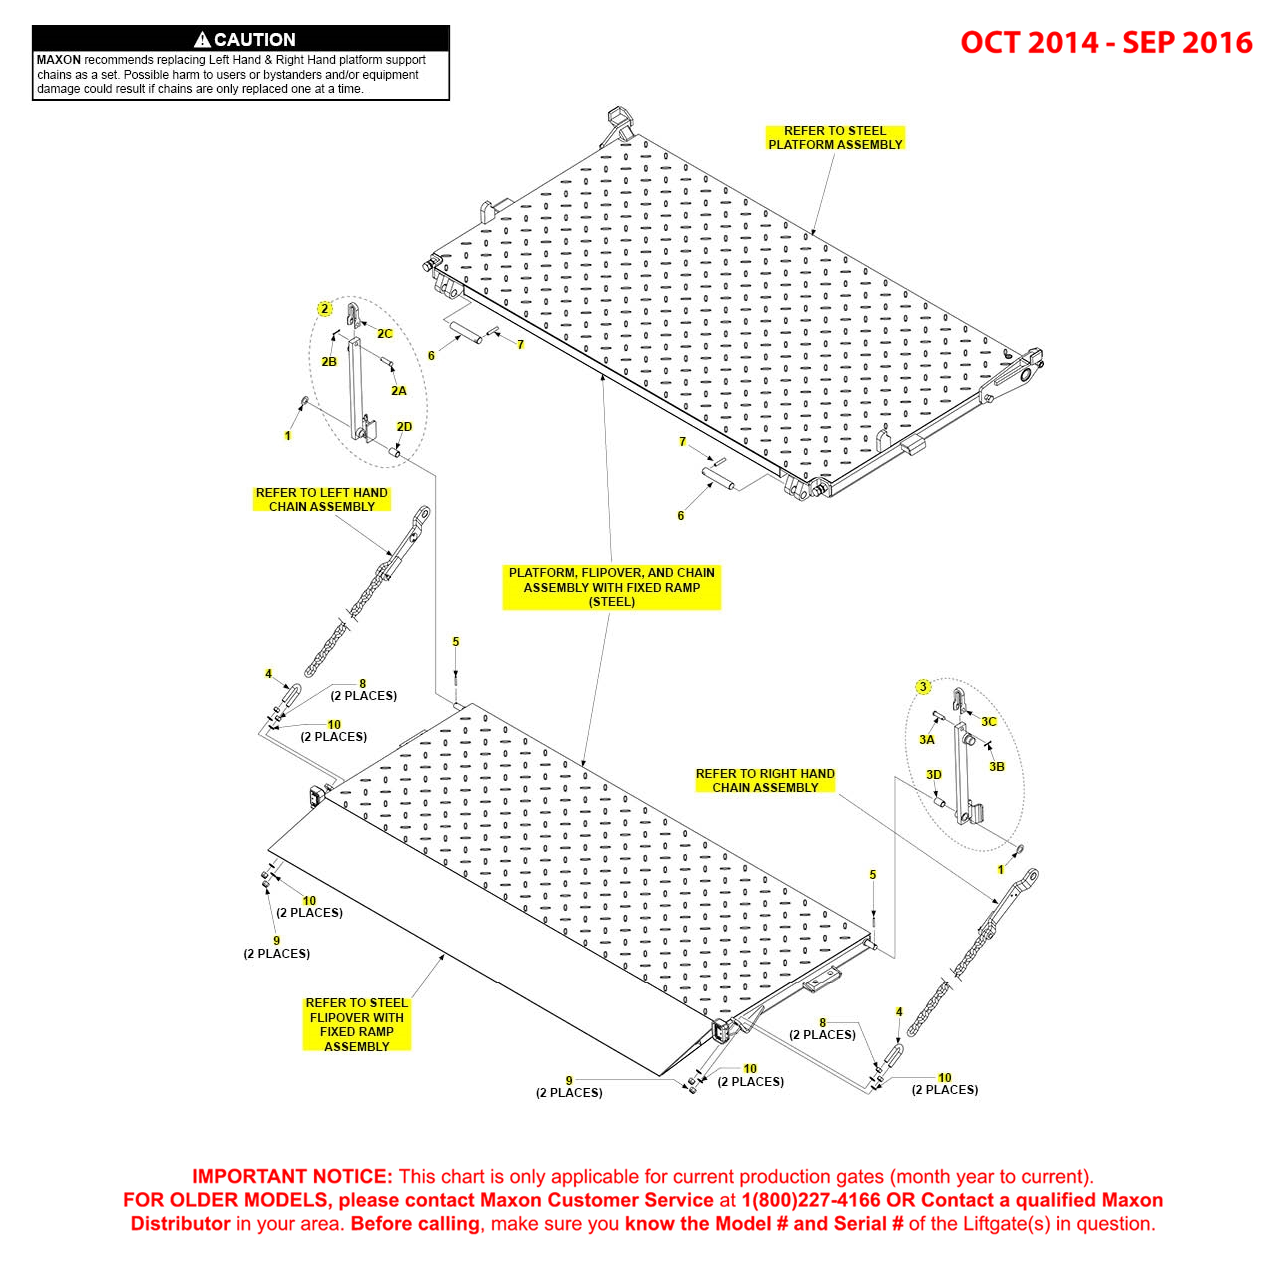 Maxon BMR-CS (Oct 2014 - Sep 2016) Steel Platform Flipover And Chain Assembly With Fixed Ramp Diagram